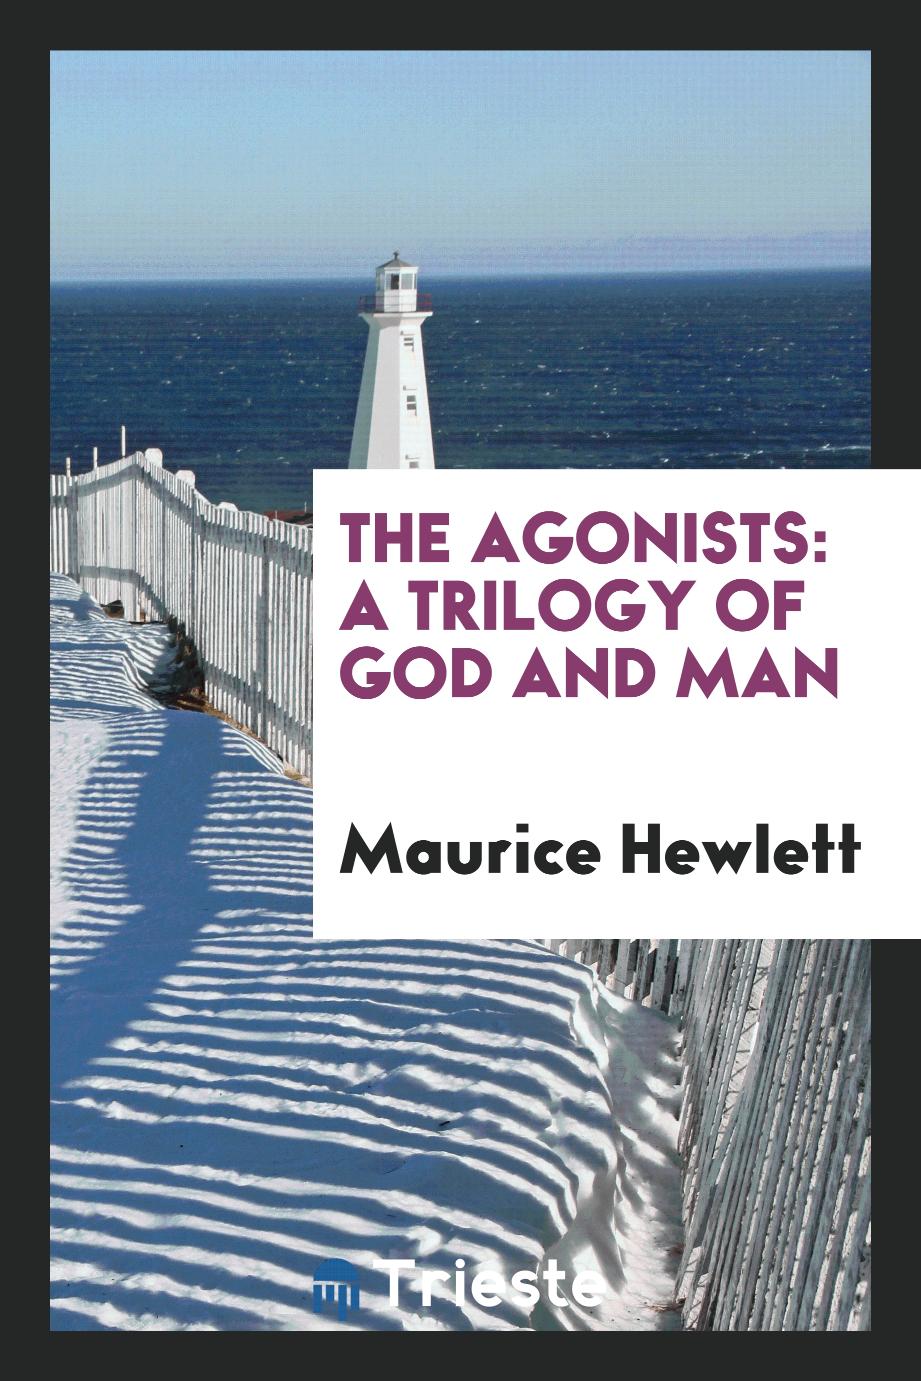 The agonists: a trilogy of God and man